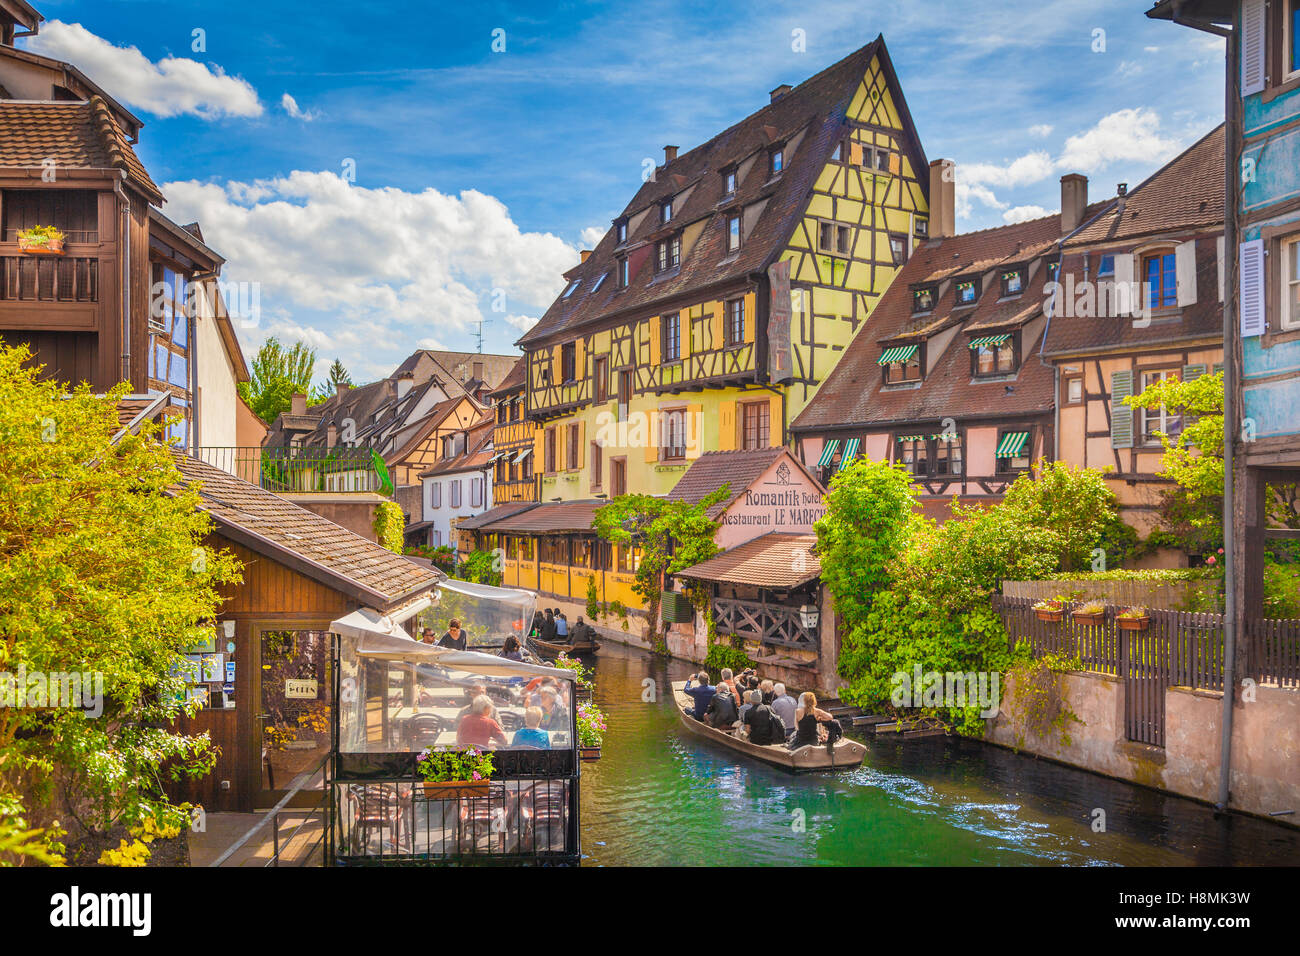 Beautiful view of the historic town of Colmar, also known as Little Venice, with tourists taking a boat ride on canal, Alsace region, France Stock Photo